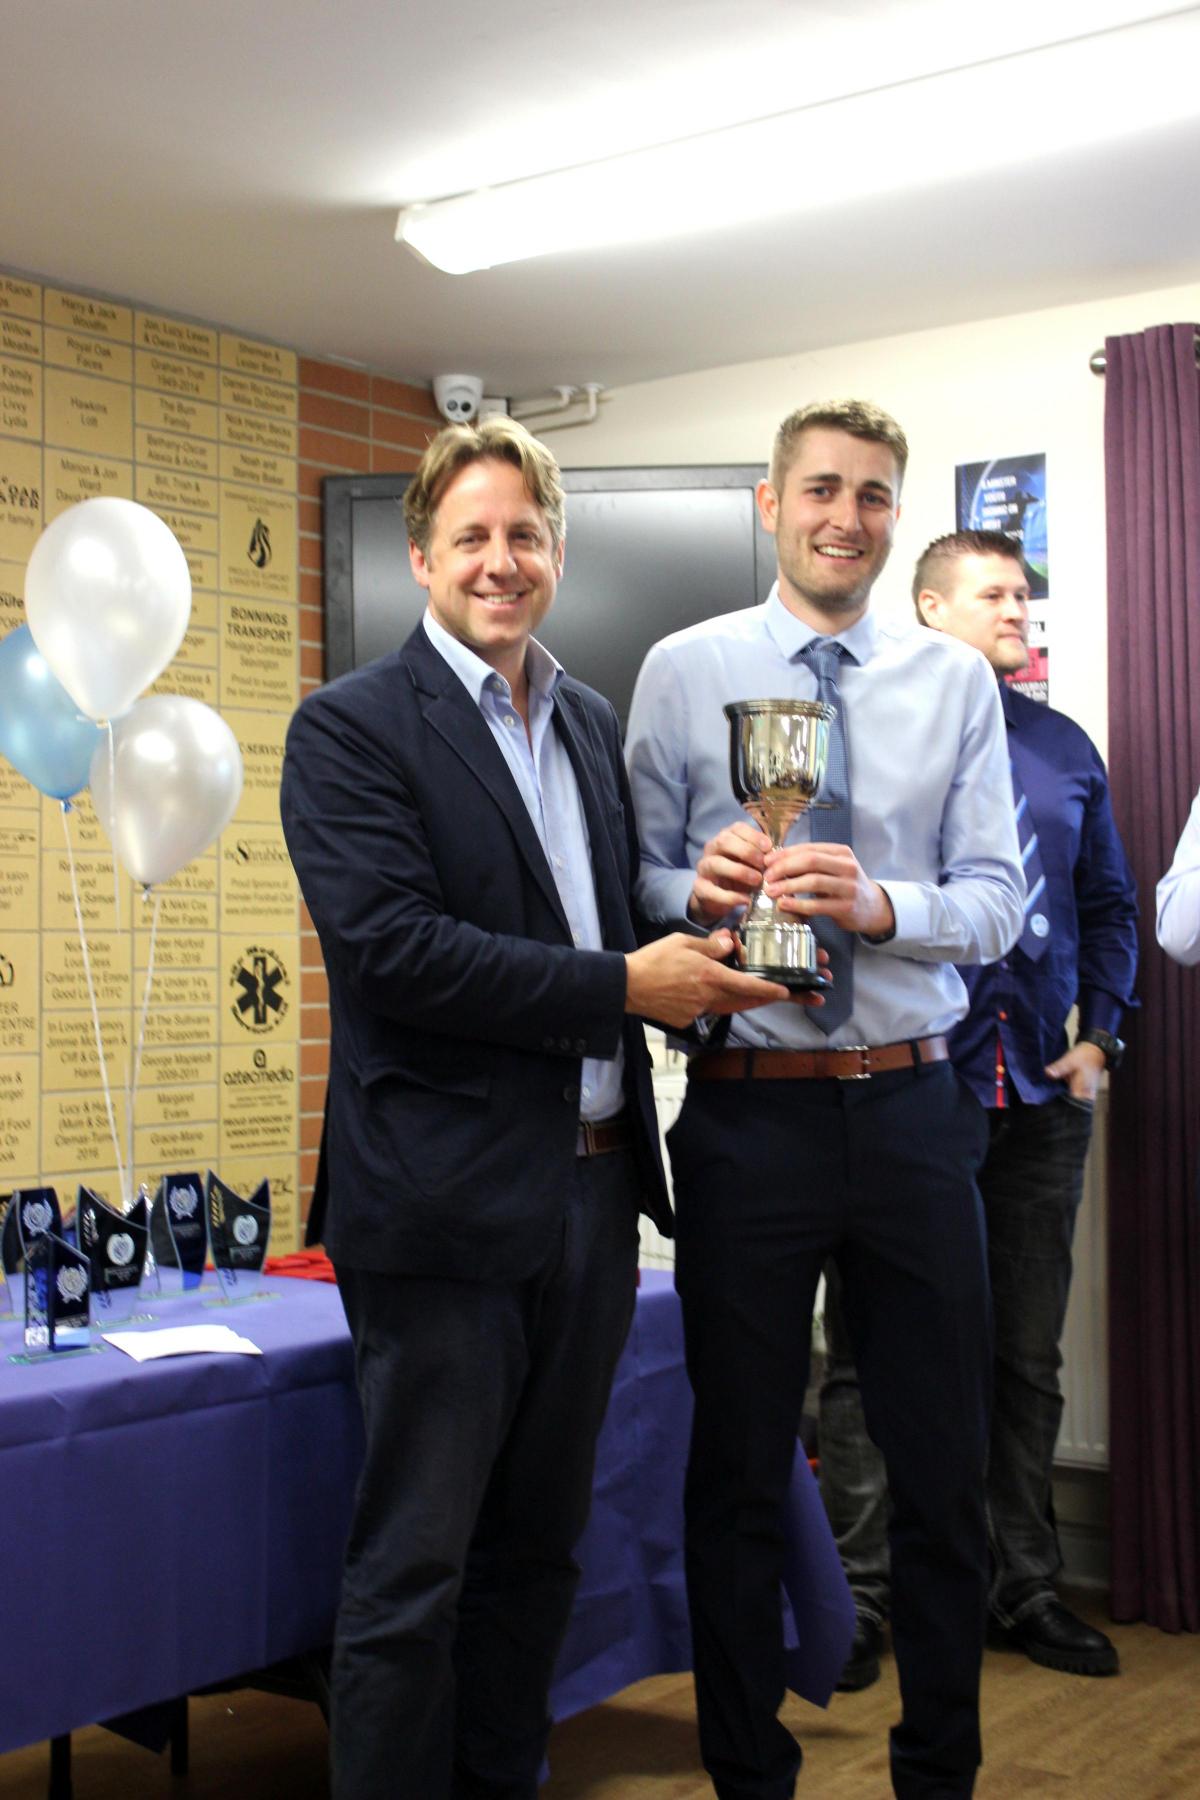 Marcus Fysh presenting captain Jonny May with the Somerset County Division 1 Champions Trophy won by the Men's 1st XI